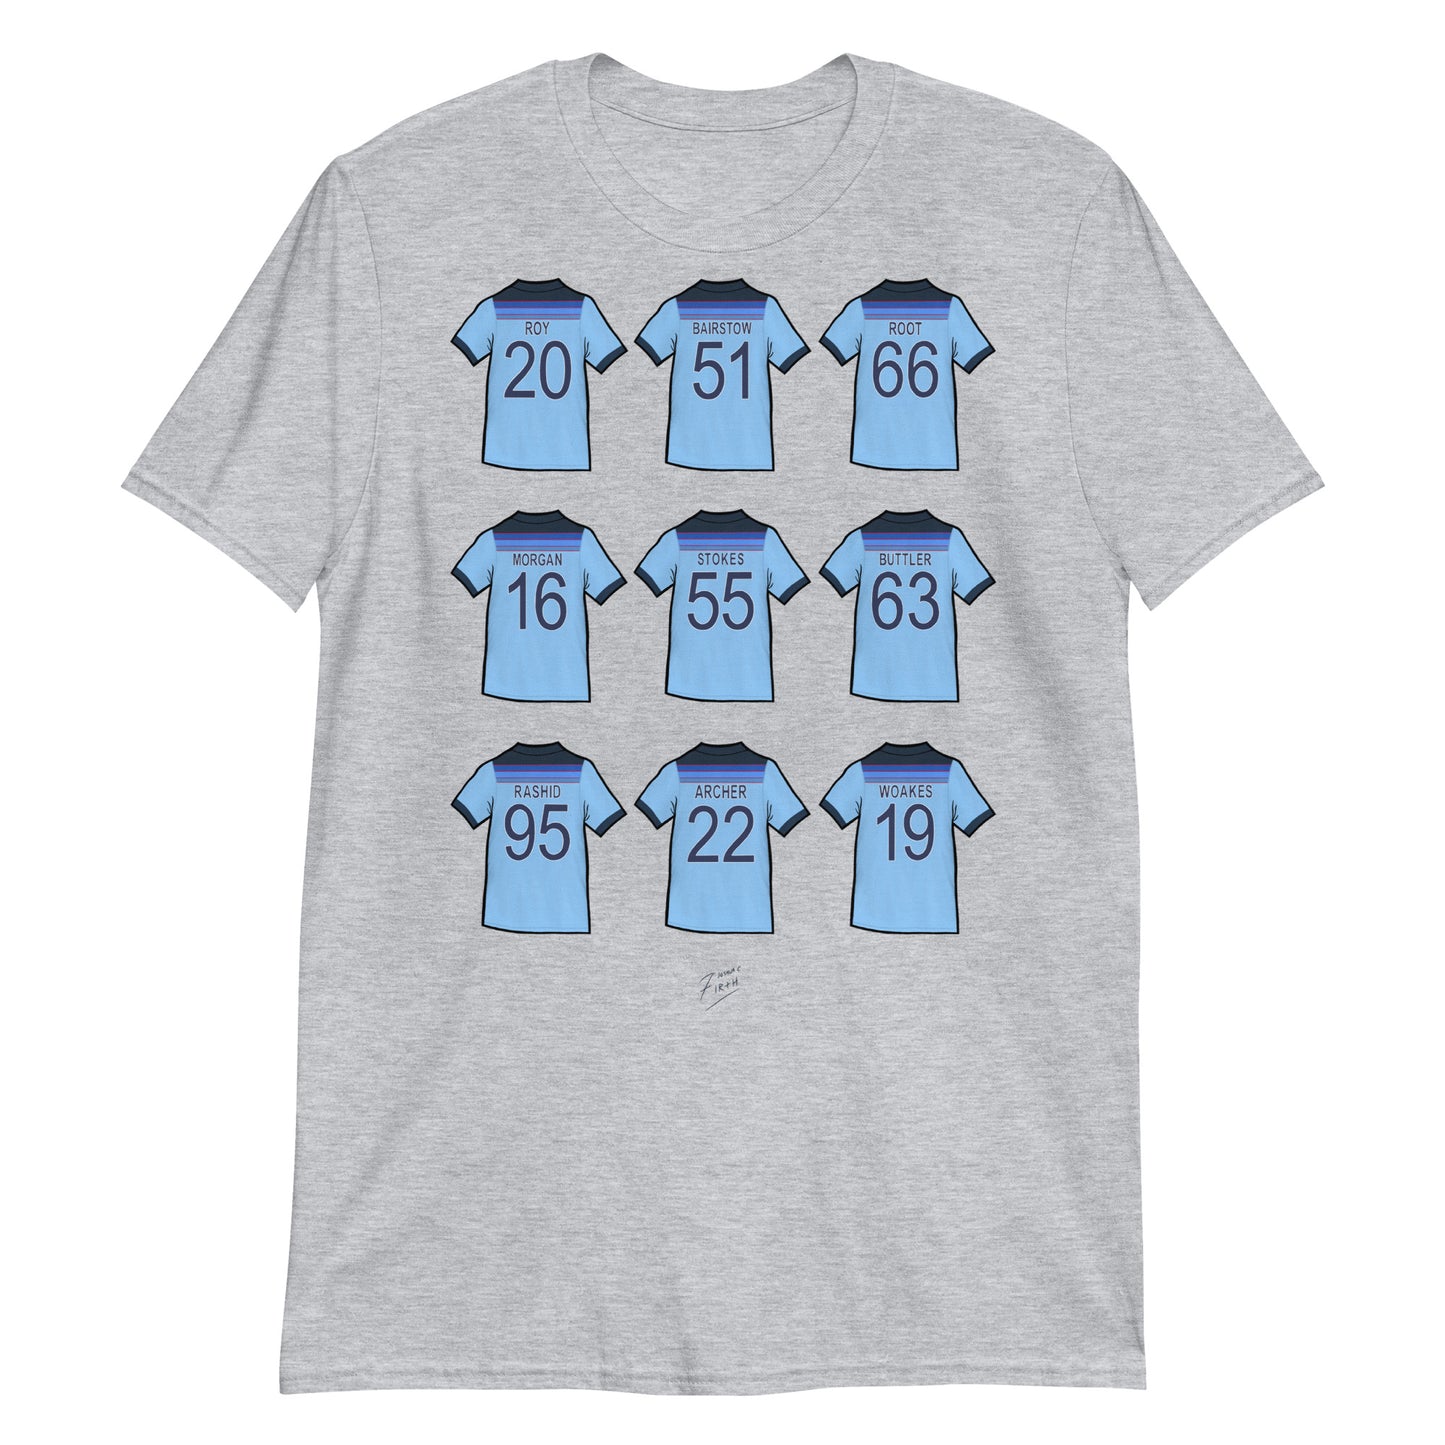 Grey England Cricket t-shirt celebrating the World Cup in 2019